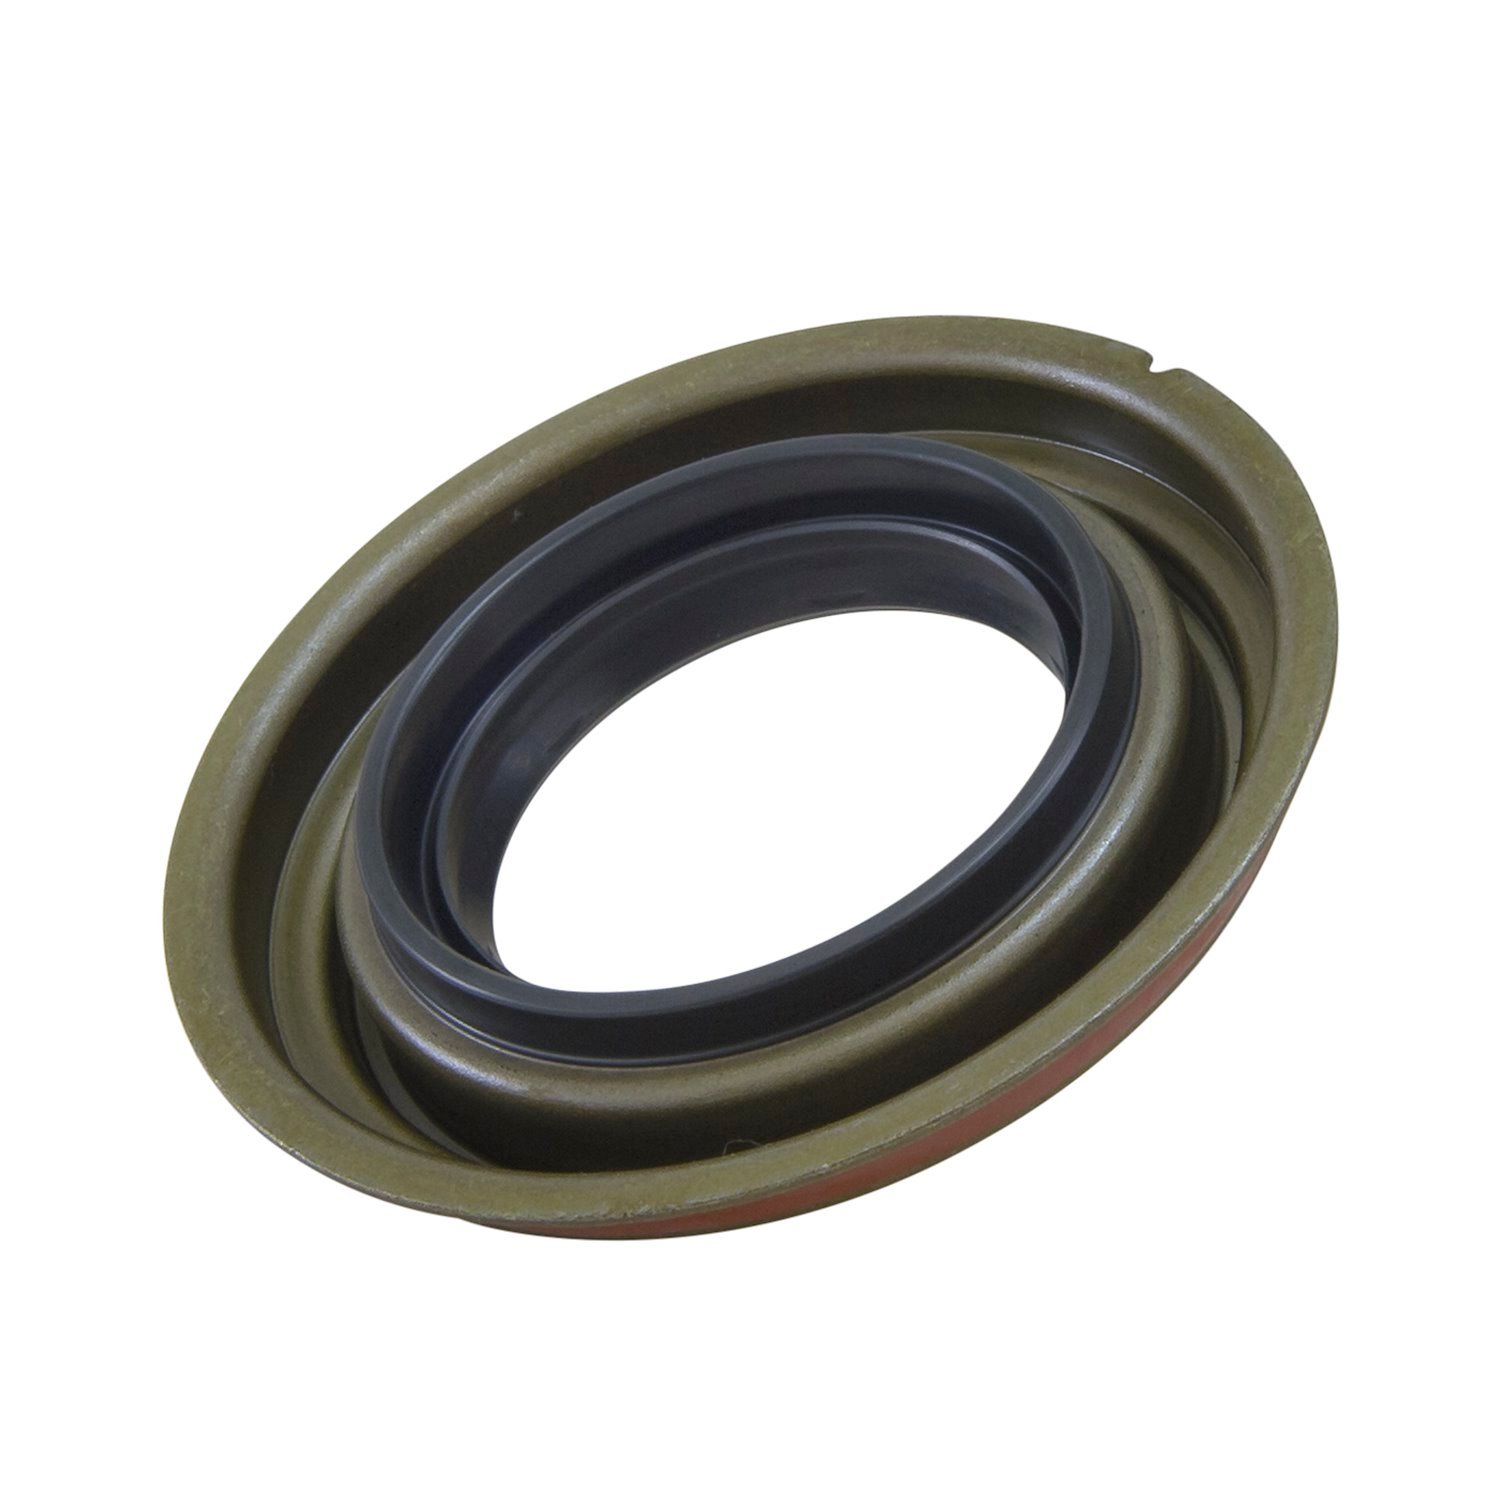 Replacement Pinion Seal For D60 & D70, '01